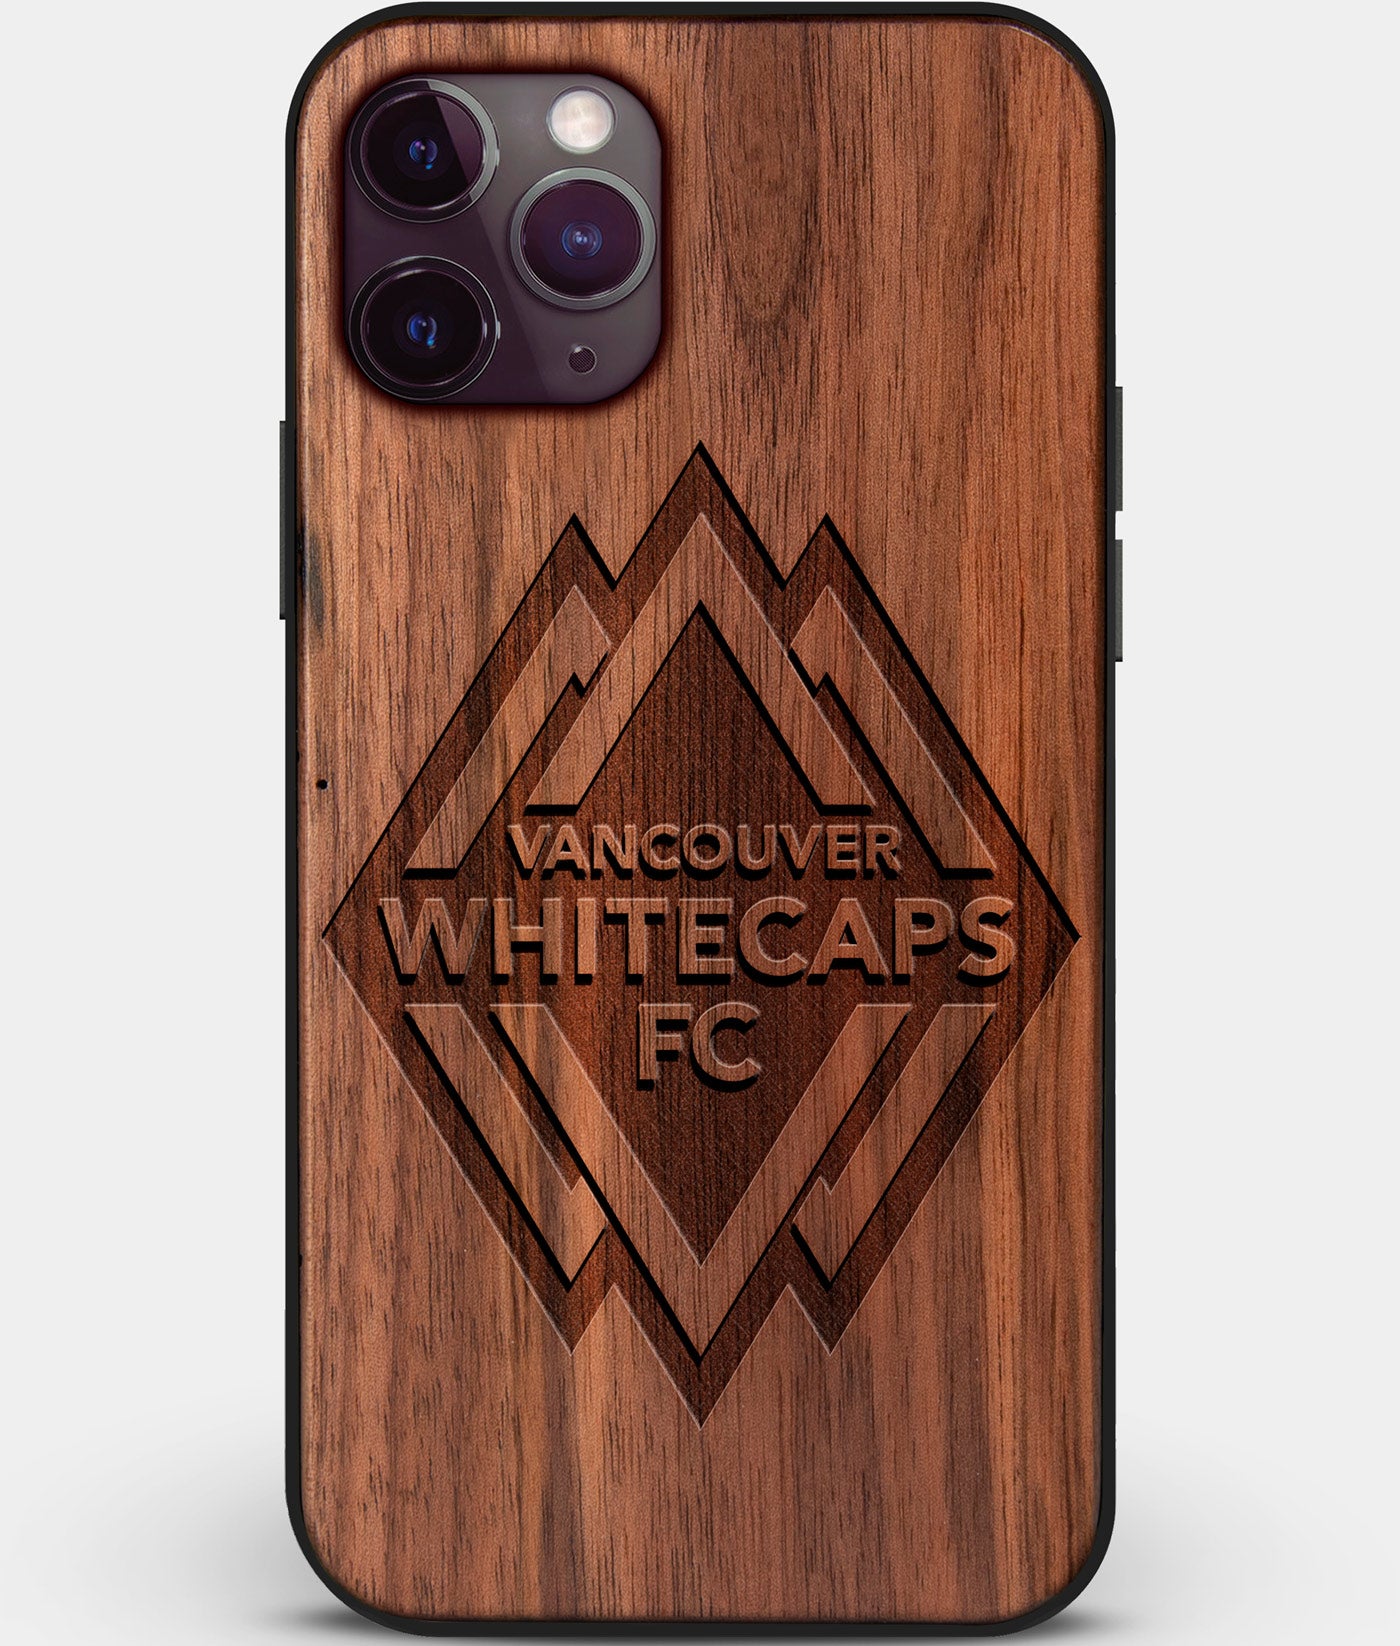 Custom Carved Wood Vancouver Whitecaps FC iPhone 11 Pro Max Case | Personalized Walnut Wood Vancouver Whitecaps FC Cover, Birthday Gift, Gifts For Him, Monogrammed Gift For Fan | by Engraved In Nature